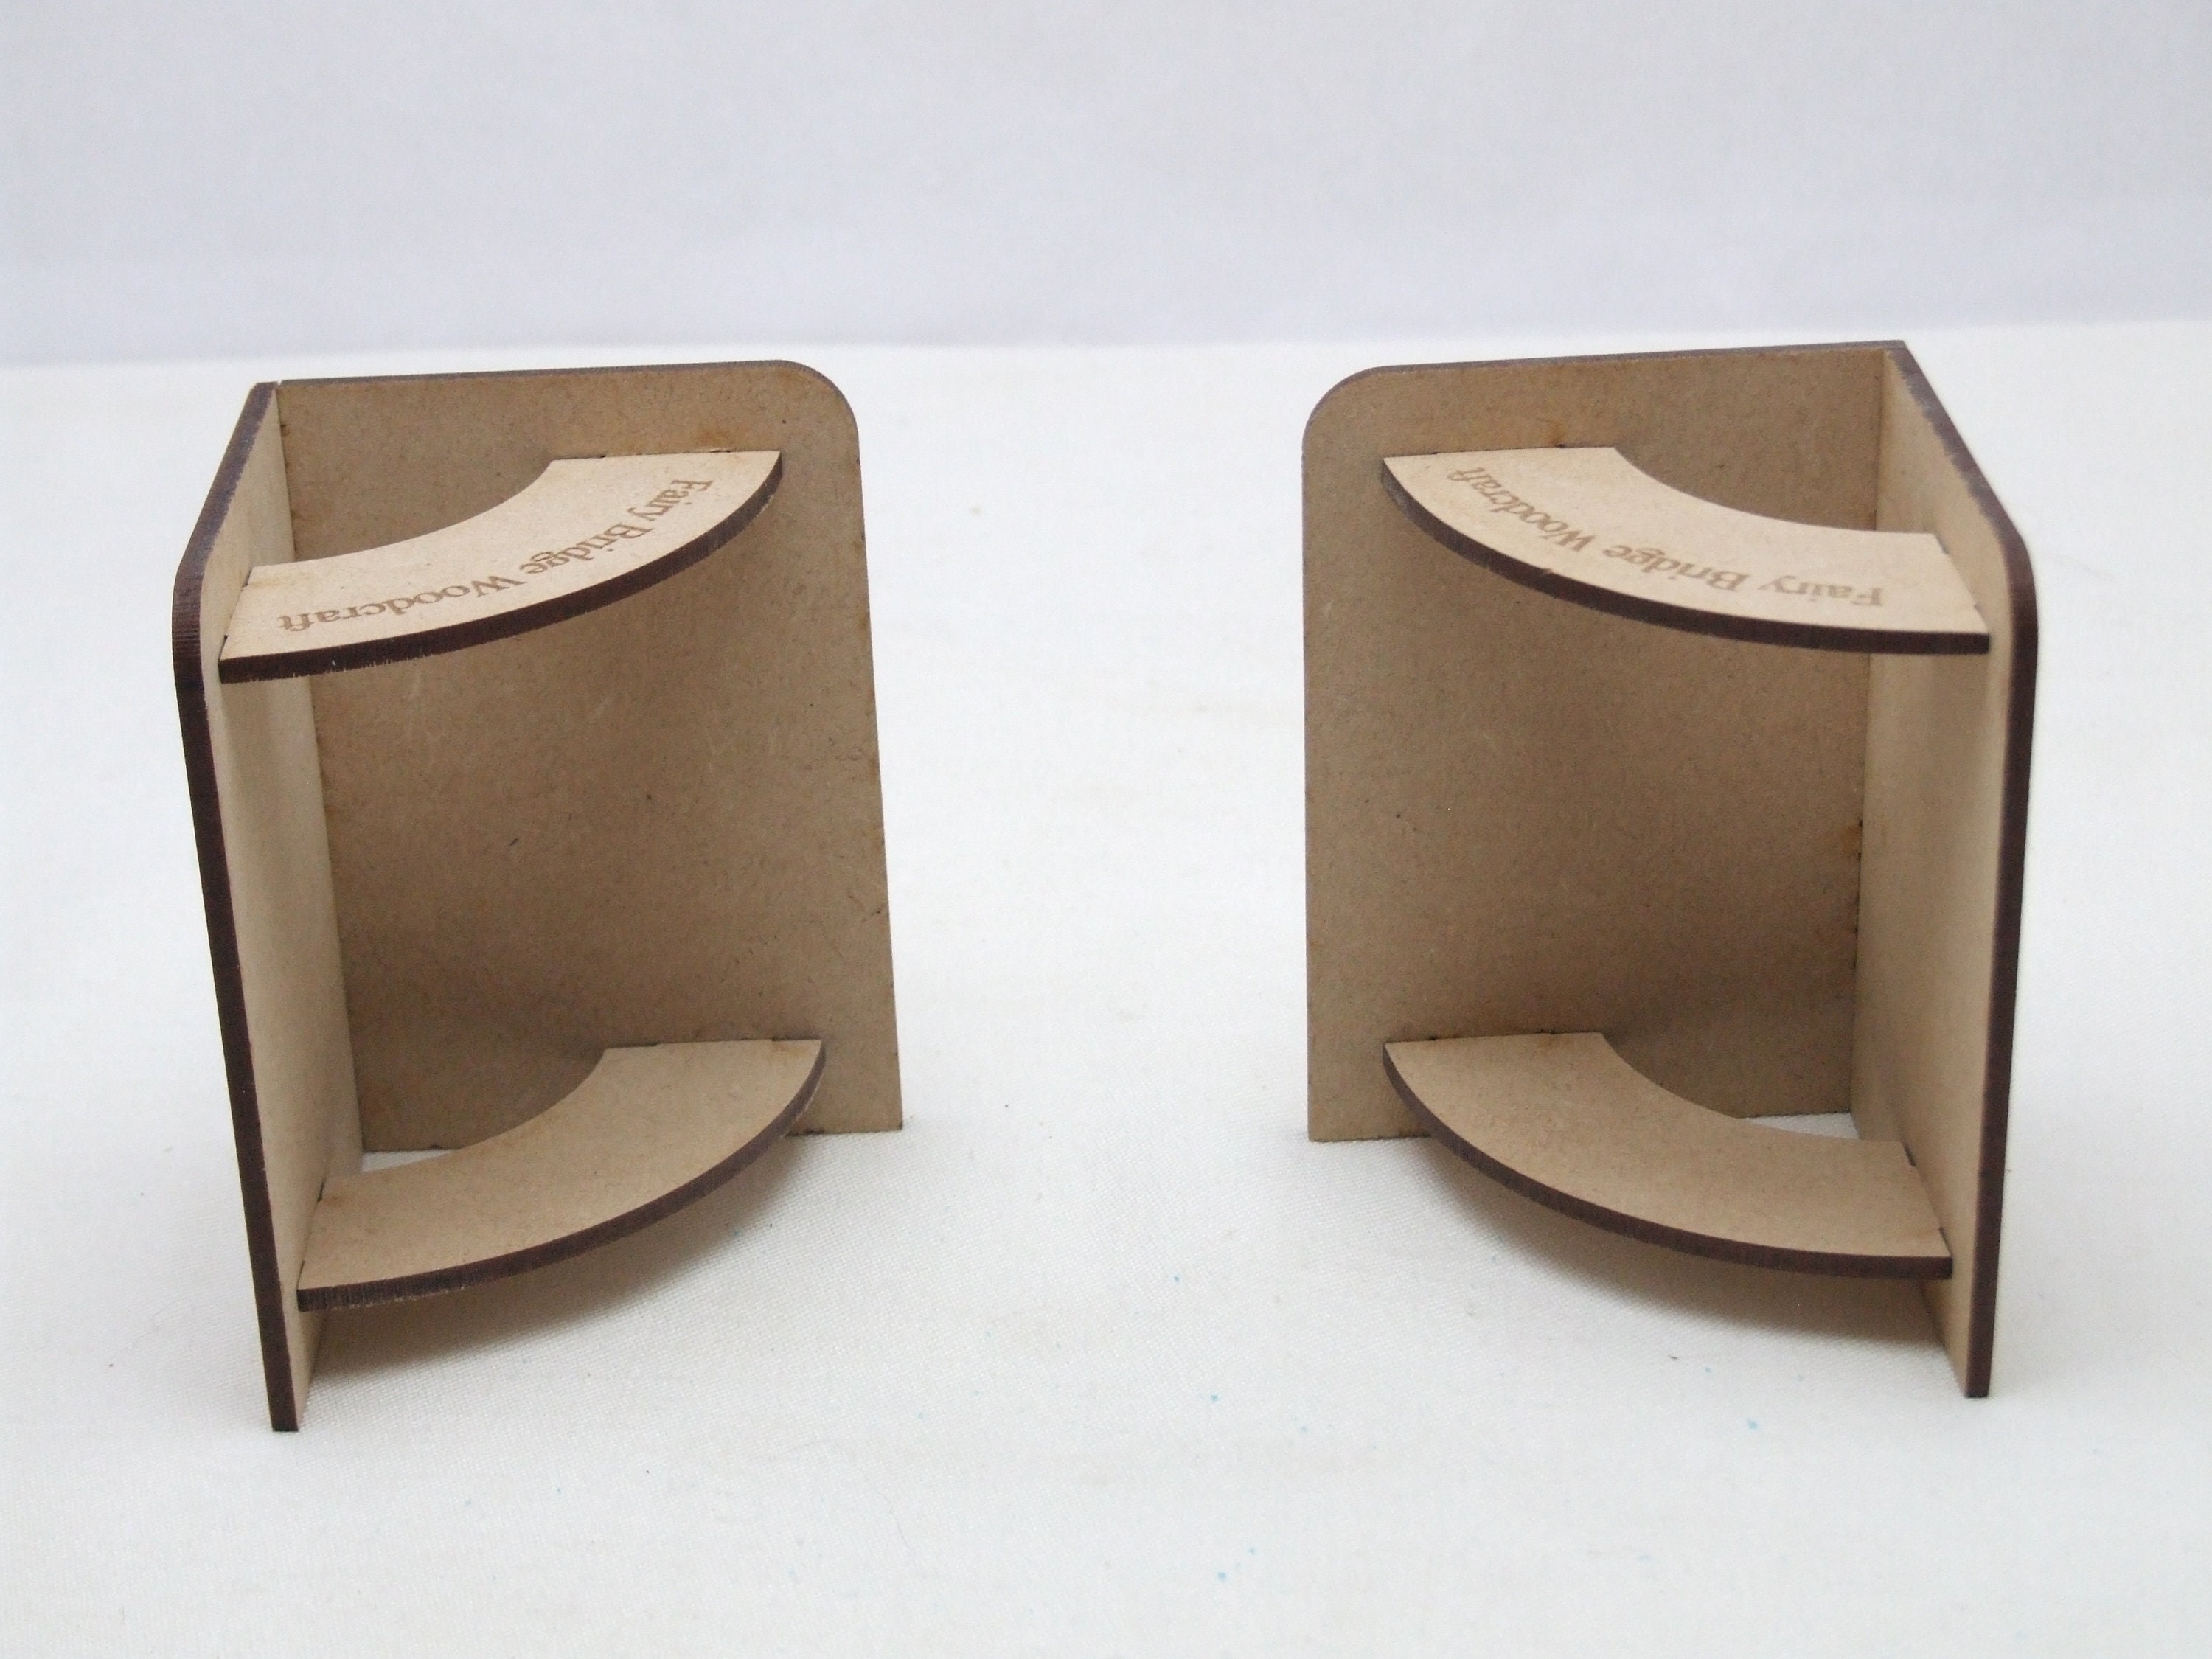 Circle Cutter for cutting centering rings from cardboard or balsa